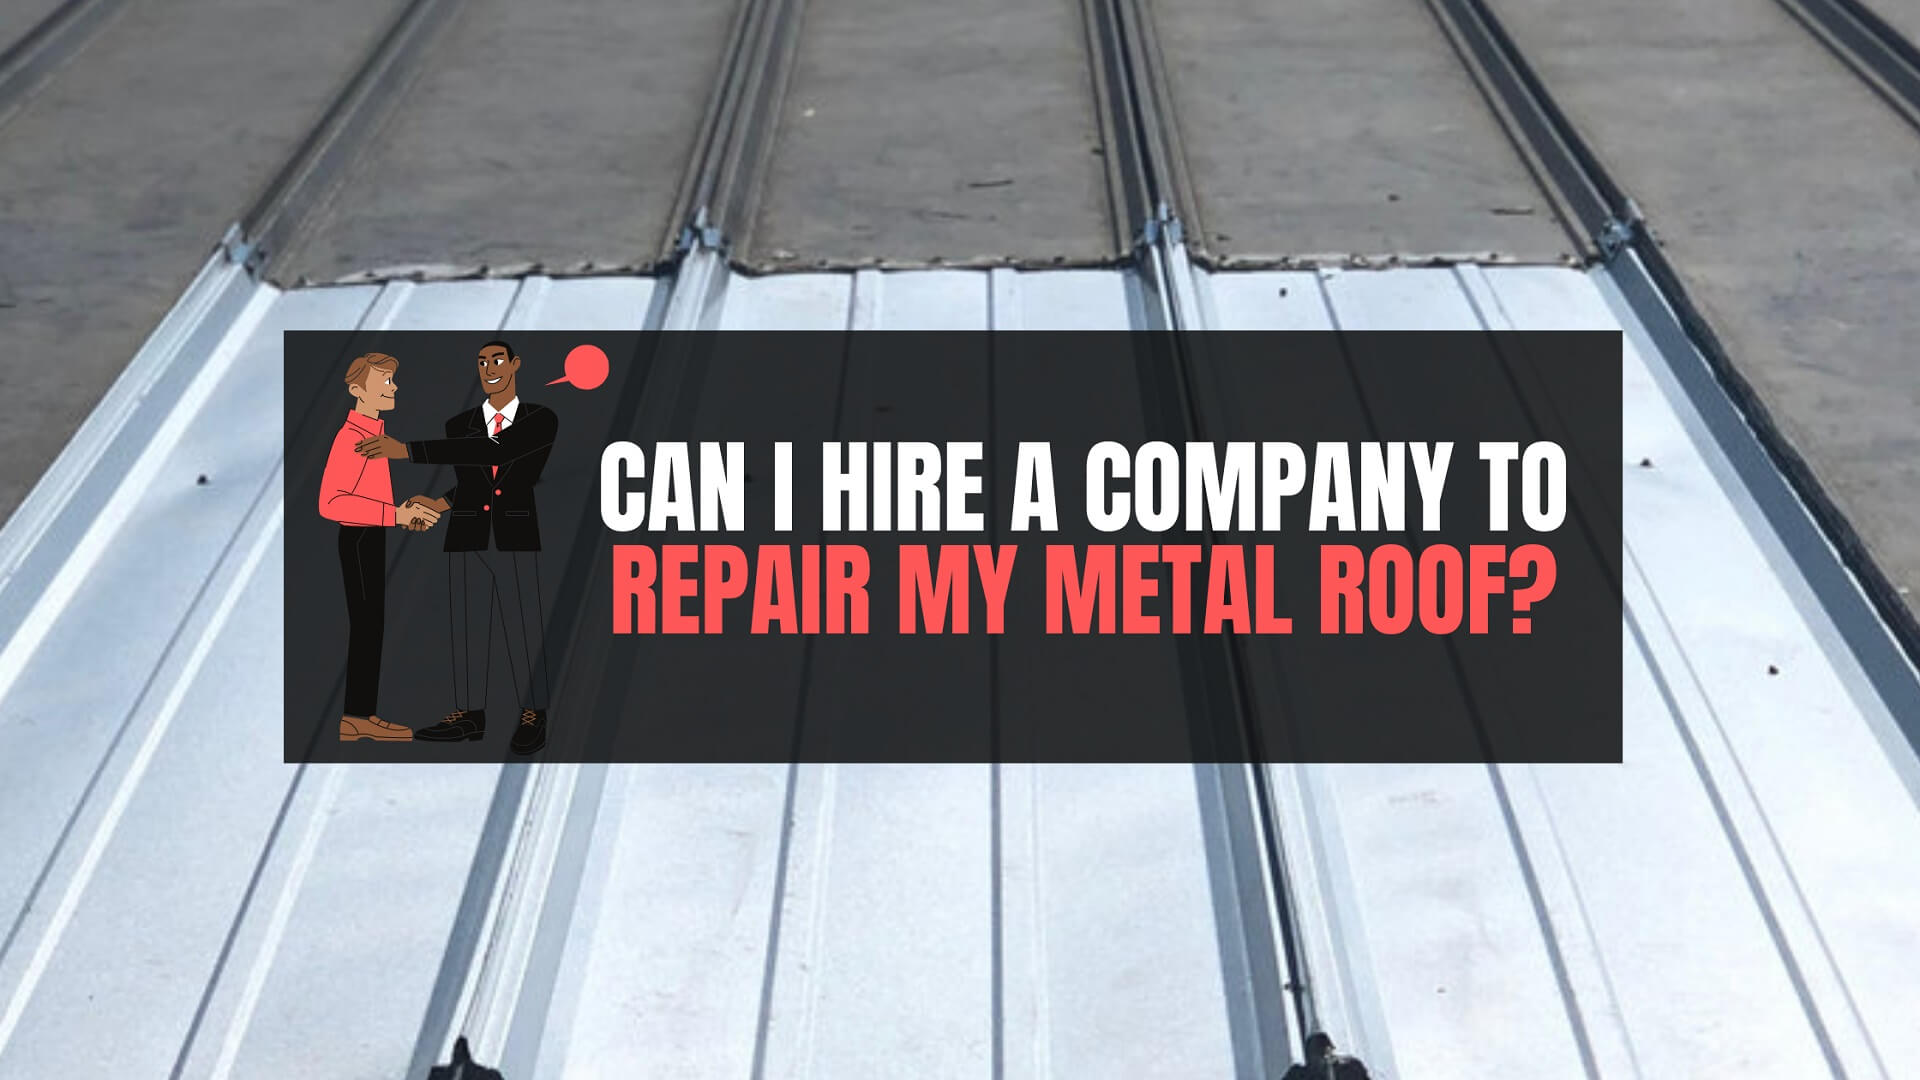 Can_I_hire_a company to repair my metal roof